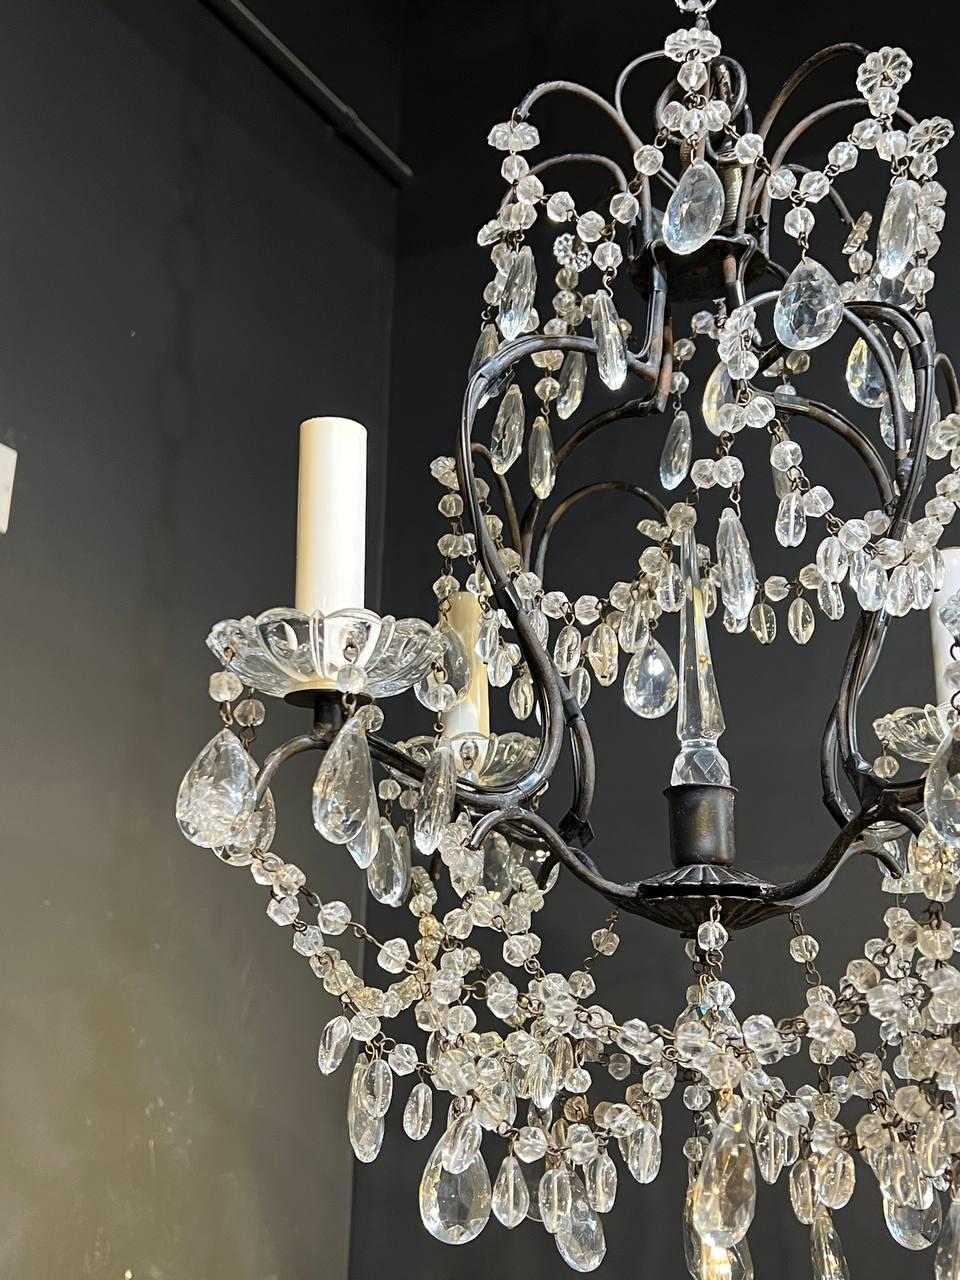 French Provincial 1940's Italian Small Crystal Chandelier For Sale